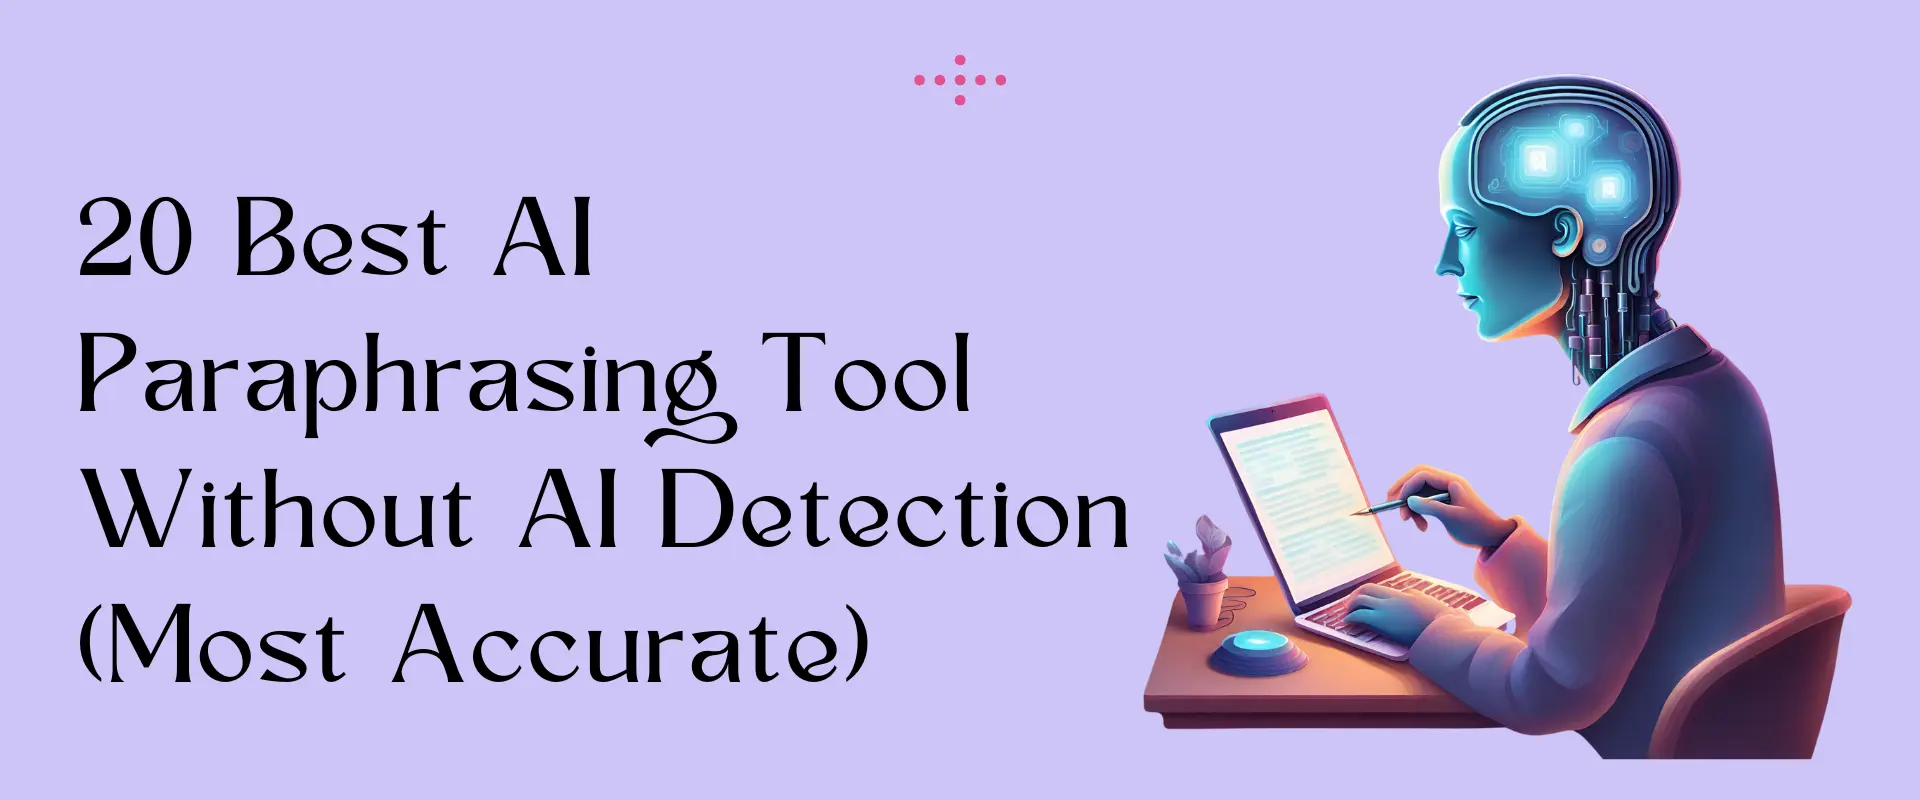 20 Best AI Paraphrasing Tool Without AI Detection (Most Accurate)